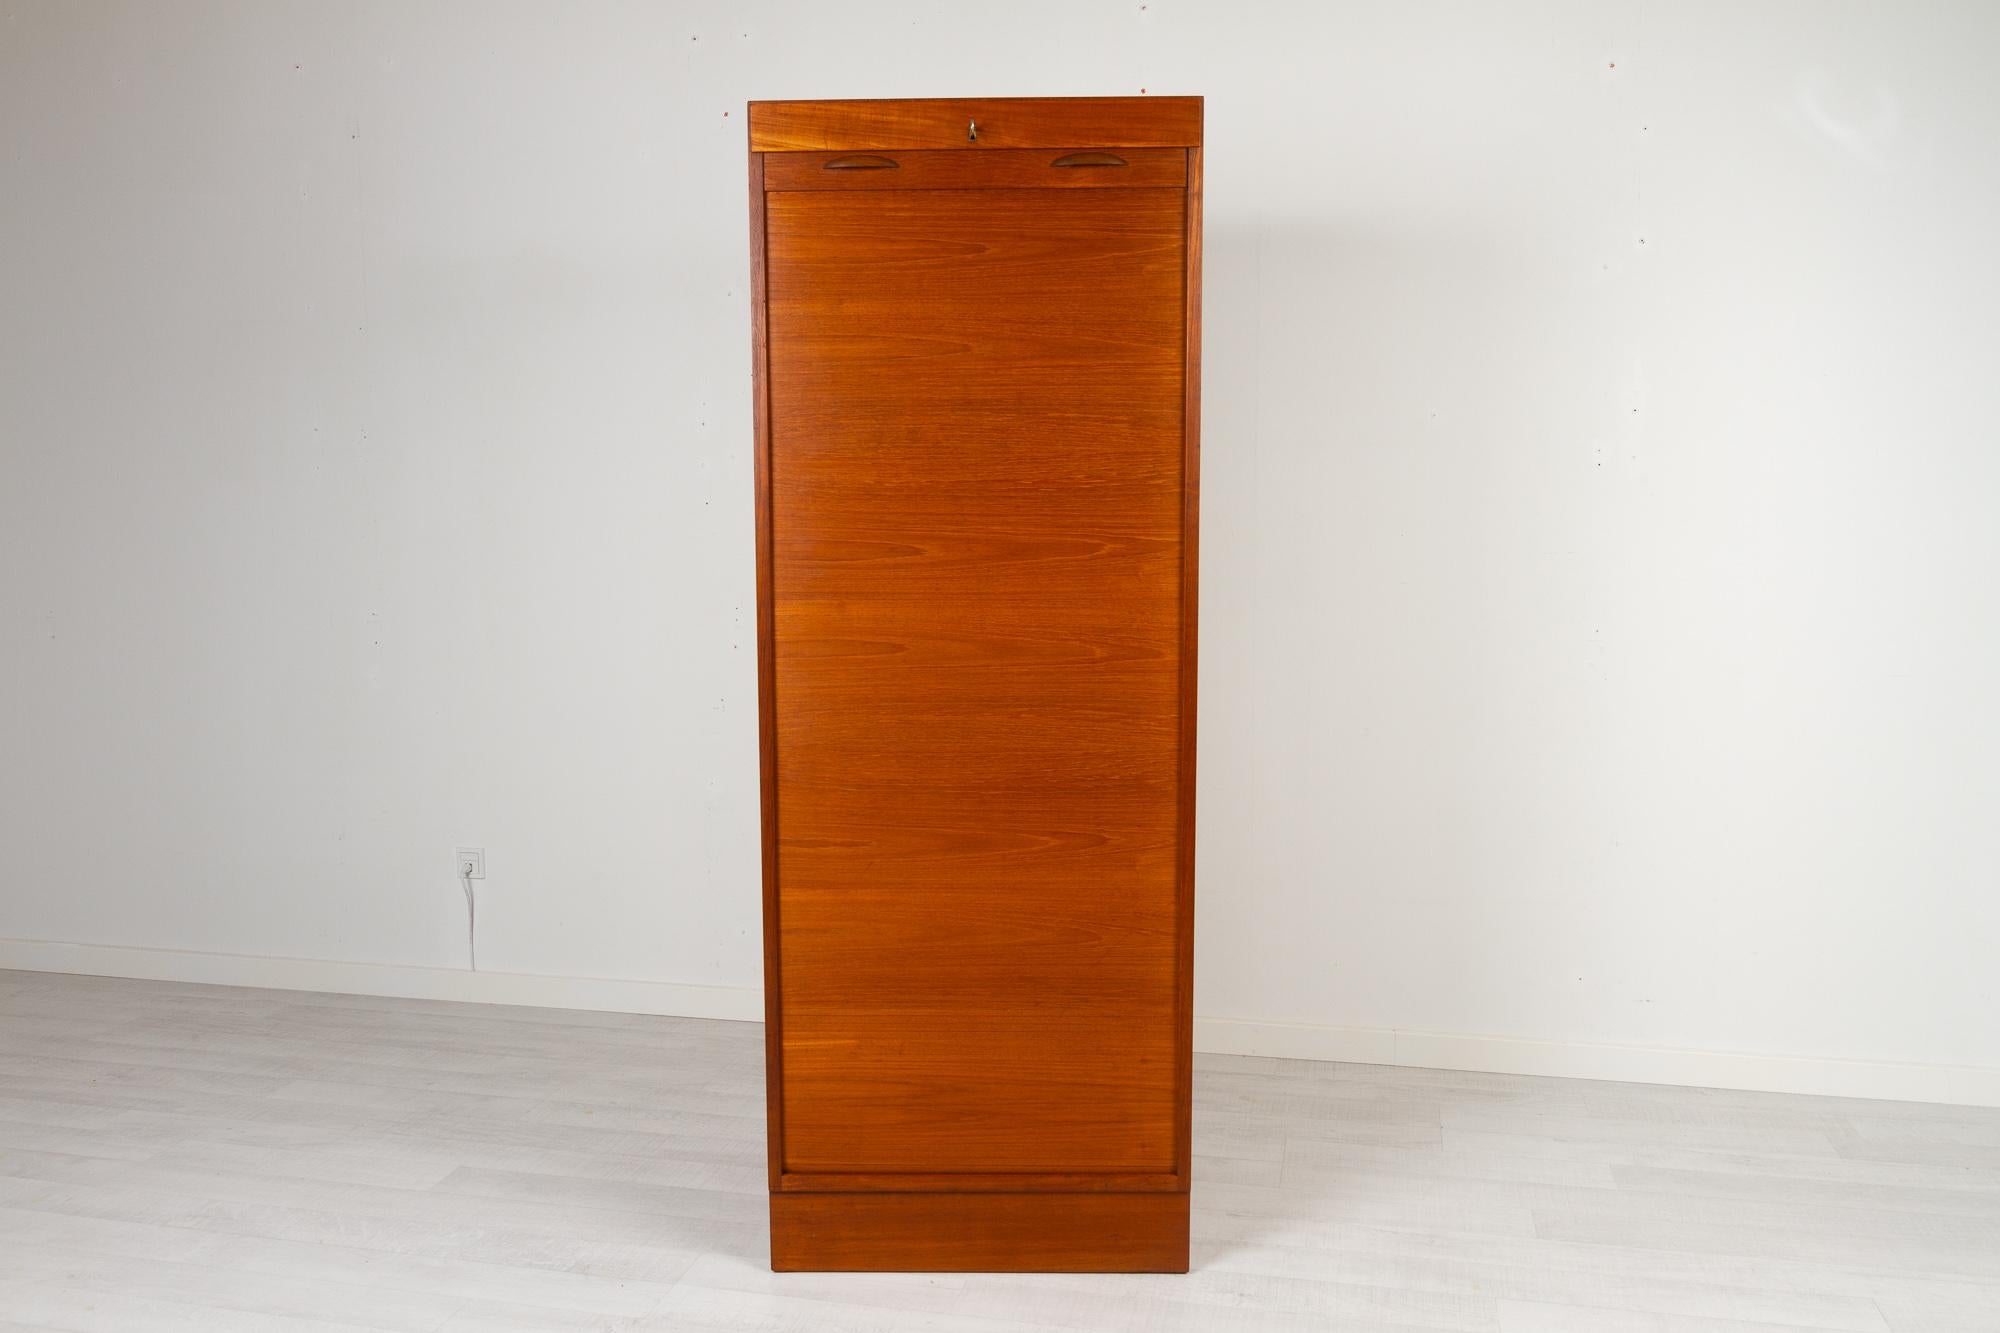 Vintage Danish teak cabinet with tambour front, 1960s
Tall Danish modern filing cabinet with vertical sliding tambour door in teak. 4 wide drawers and 1 shelf. Both shelf and drawers can be placed as desired. Rolling door opens with key. Key is